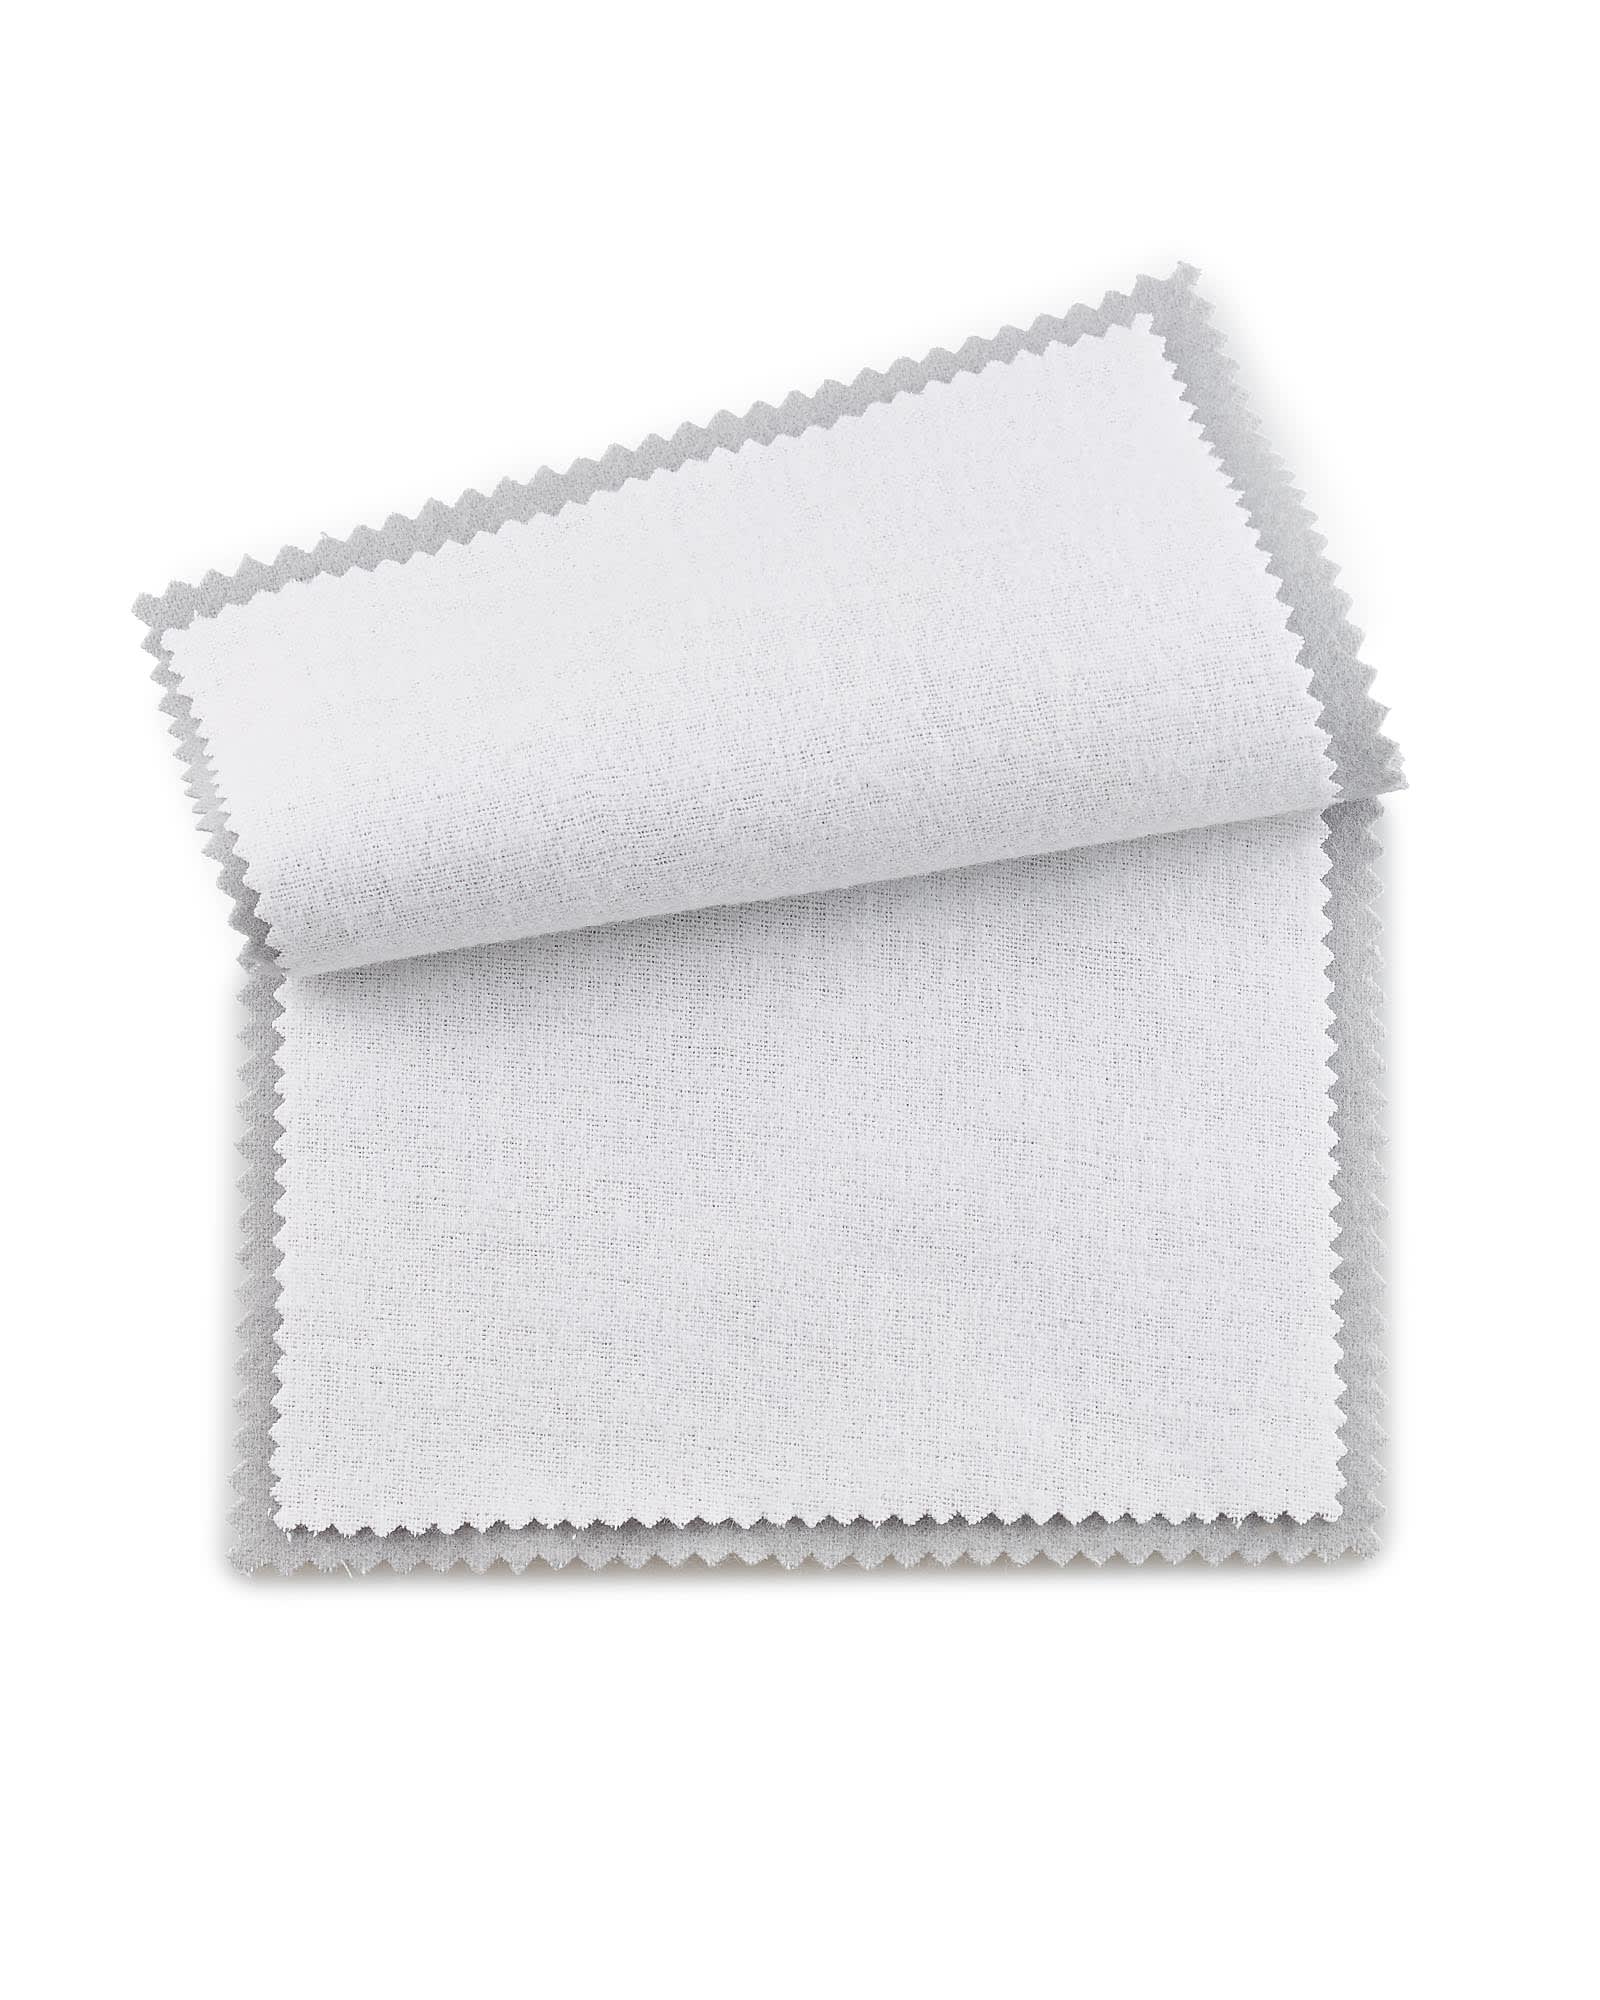 Jewelry Polishing Cloth – Little Sycamore